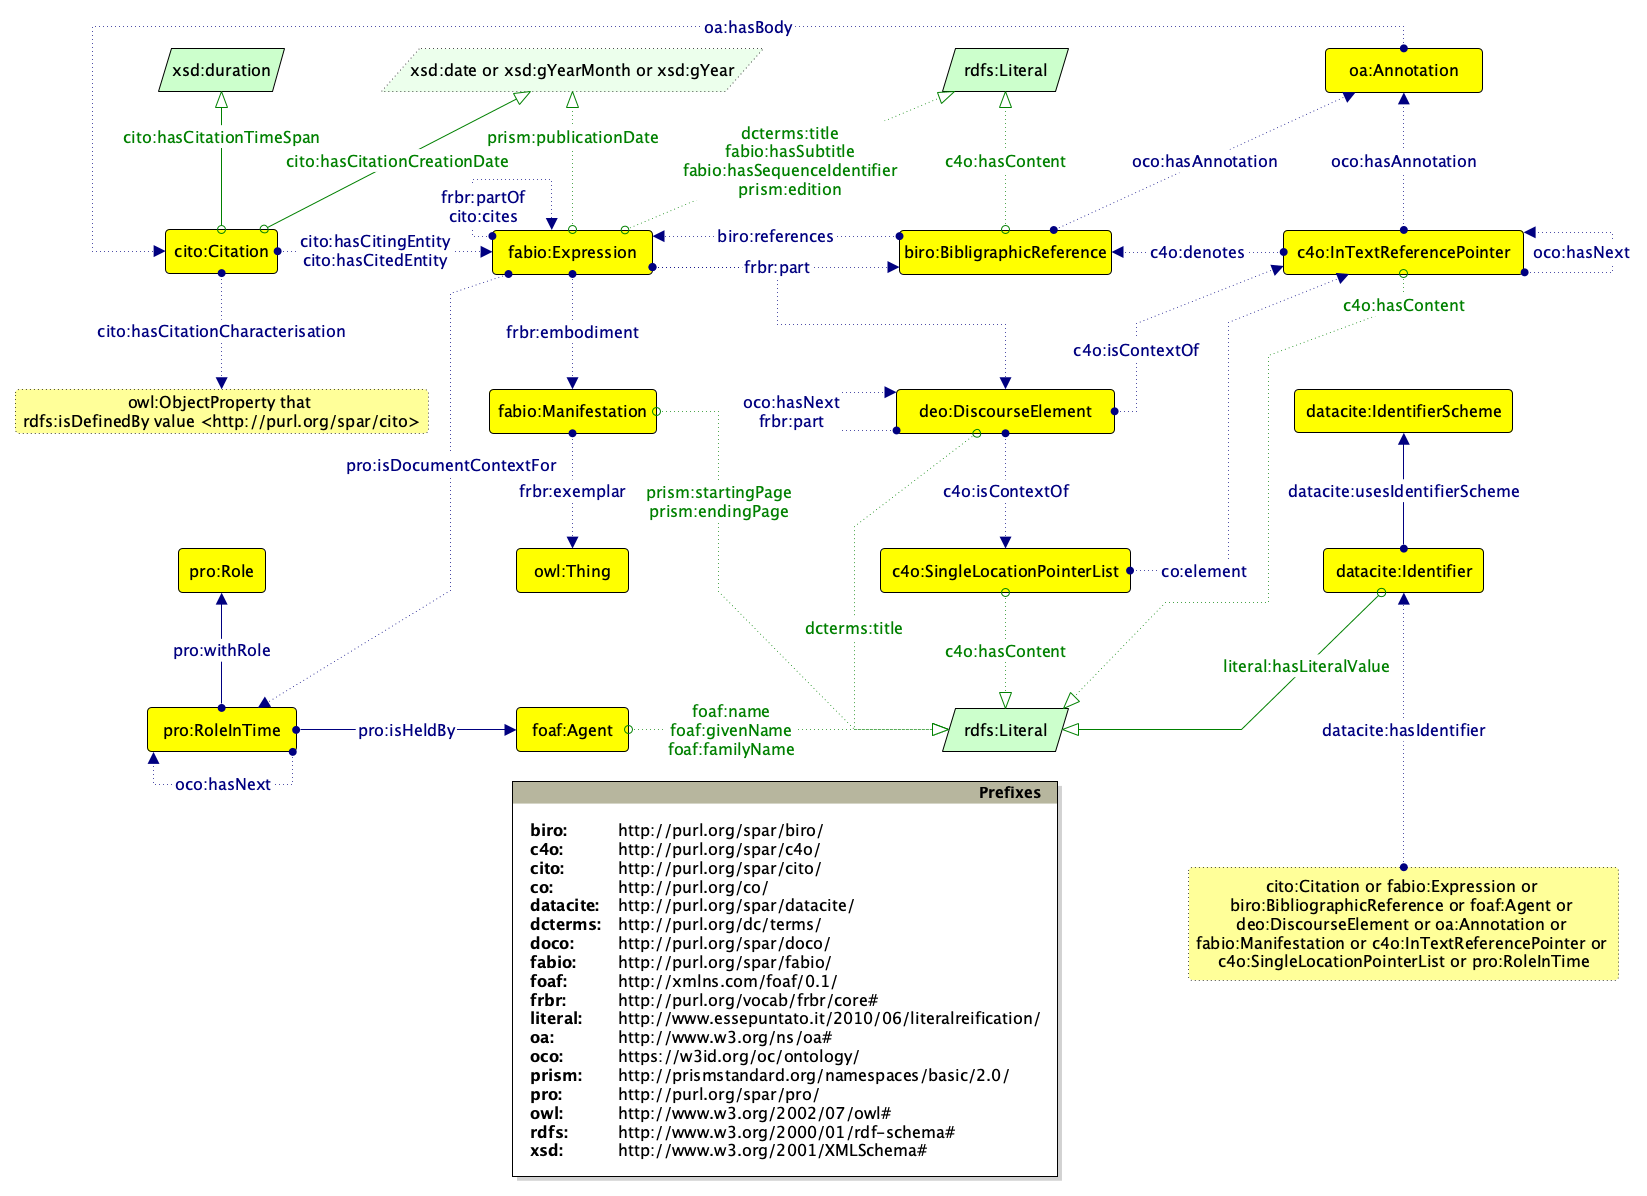 The Graffoo diagram of the main ontological entities described by the OCC metadata model.